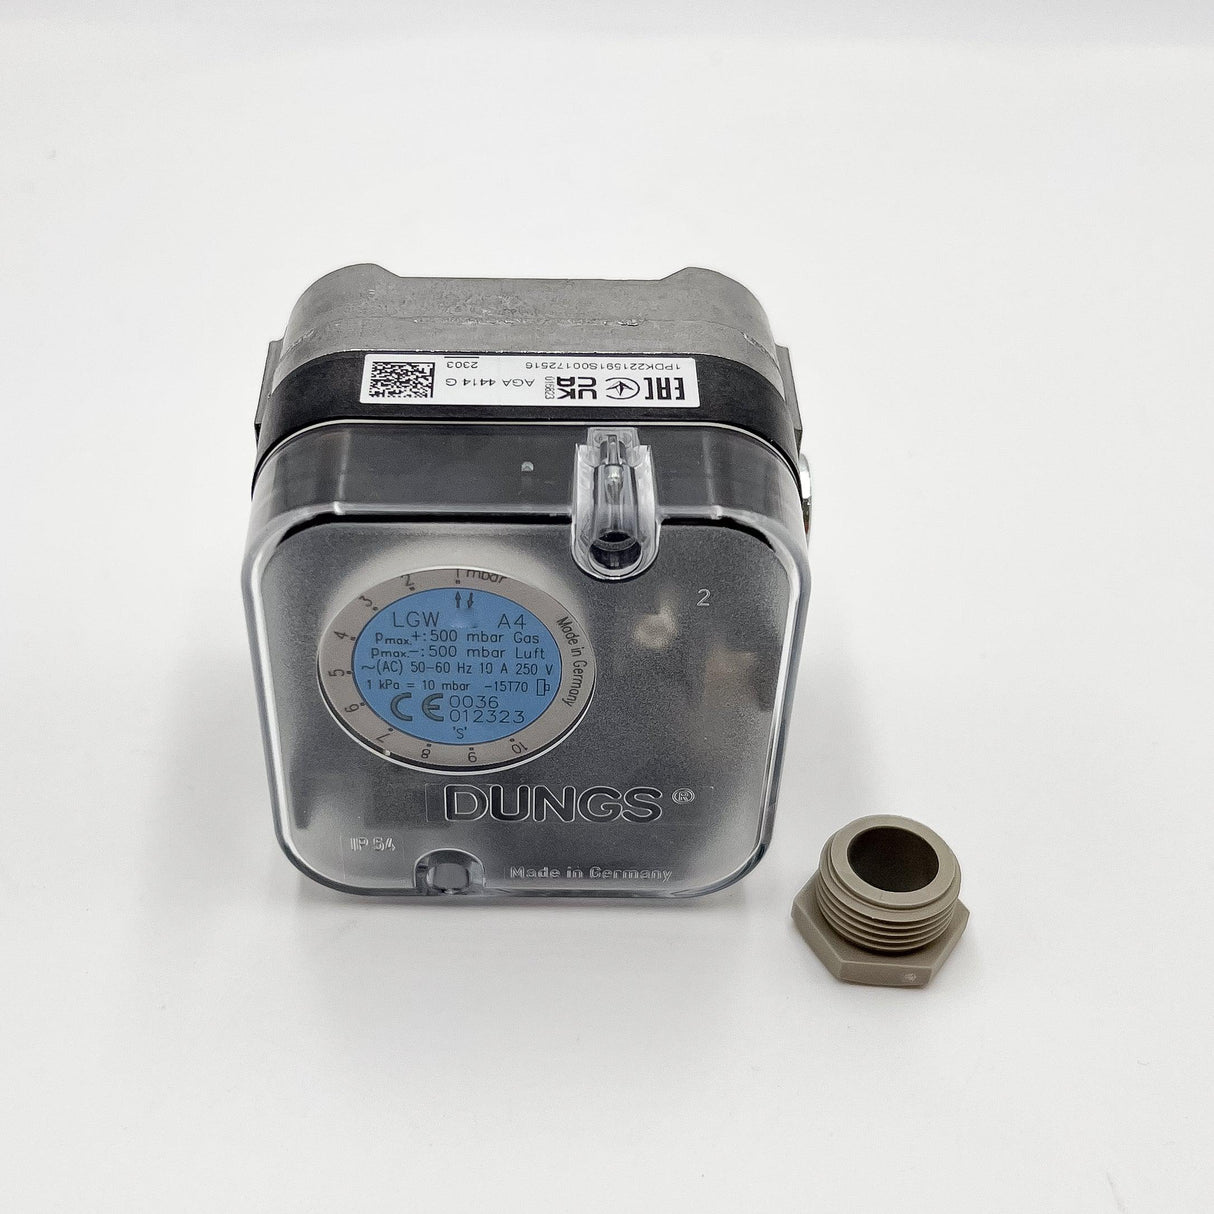 Dungs LGW50 A4 2.5-50 mbar Differential Air Pressure Switch